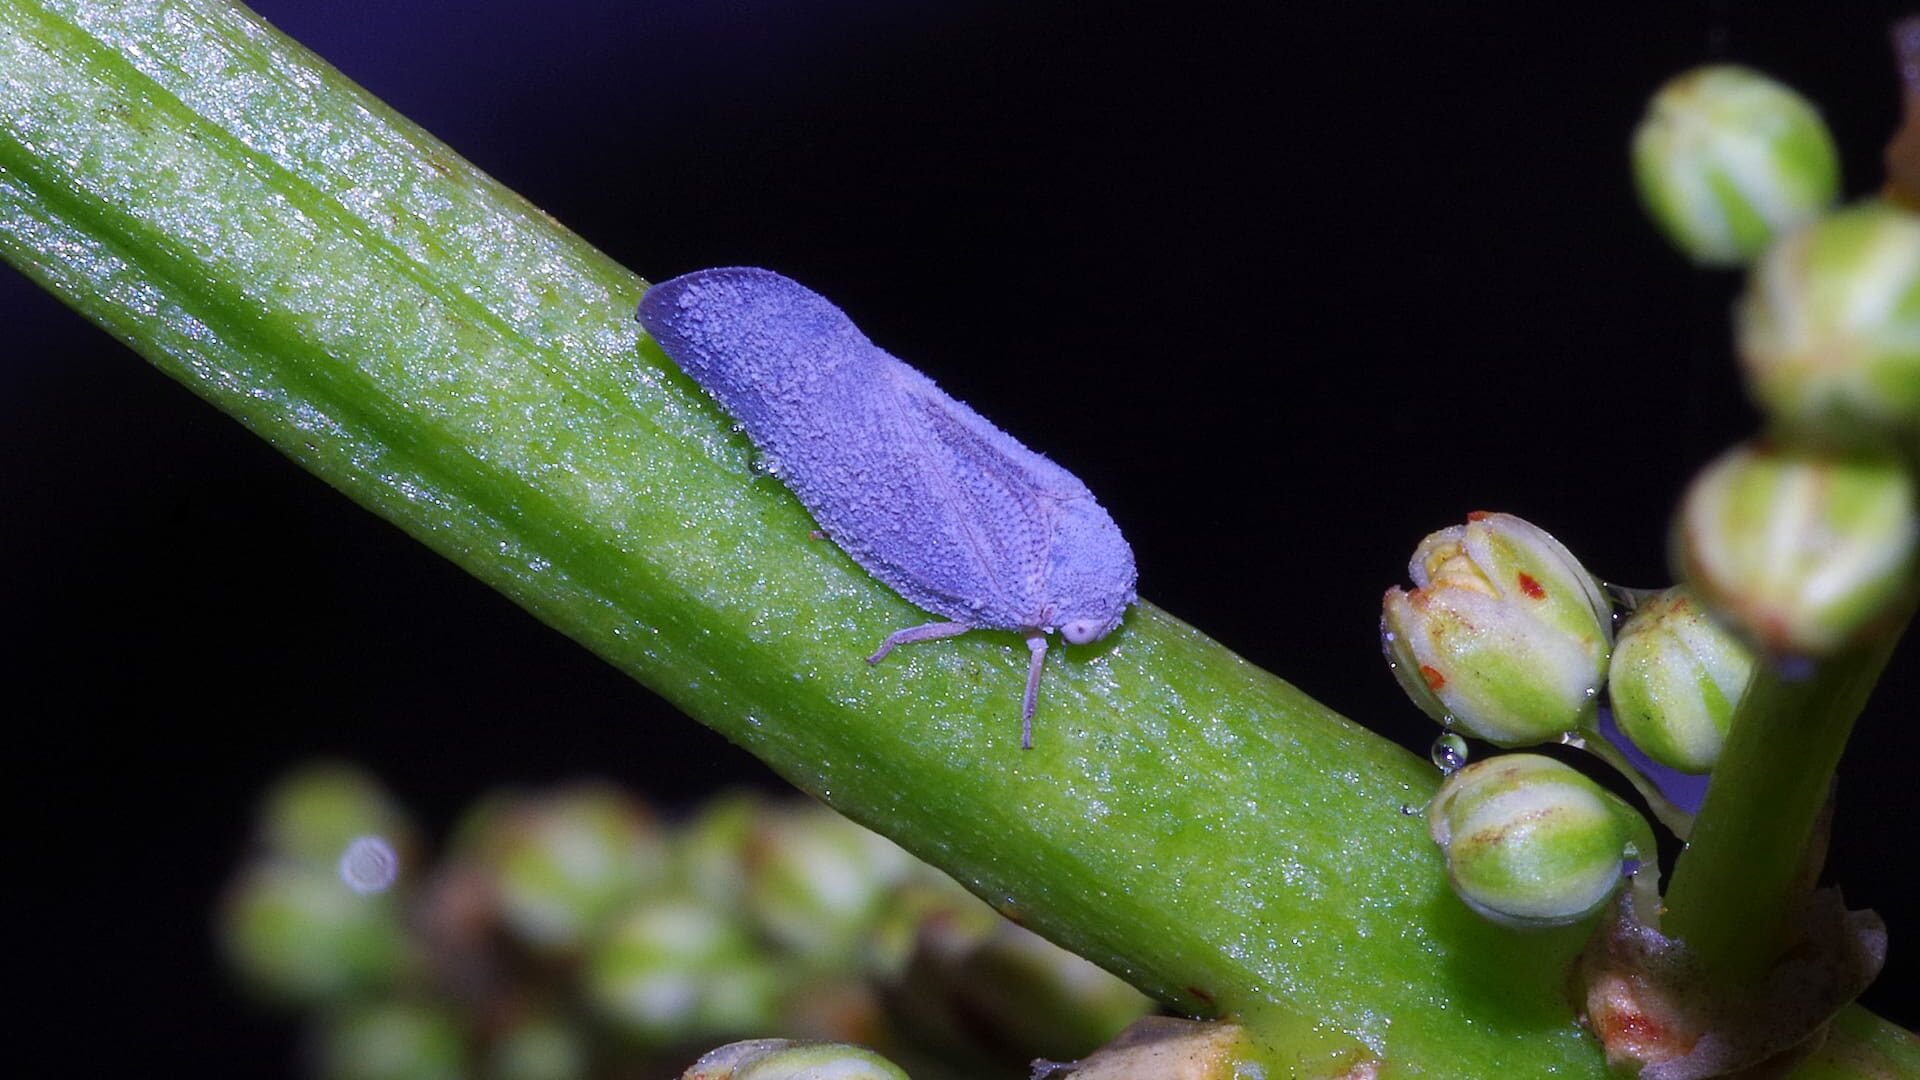 bright purple bug on a bright green plant stem. The bug is heading southeast on the stem towards some budding flowers